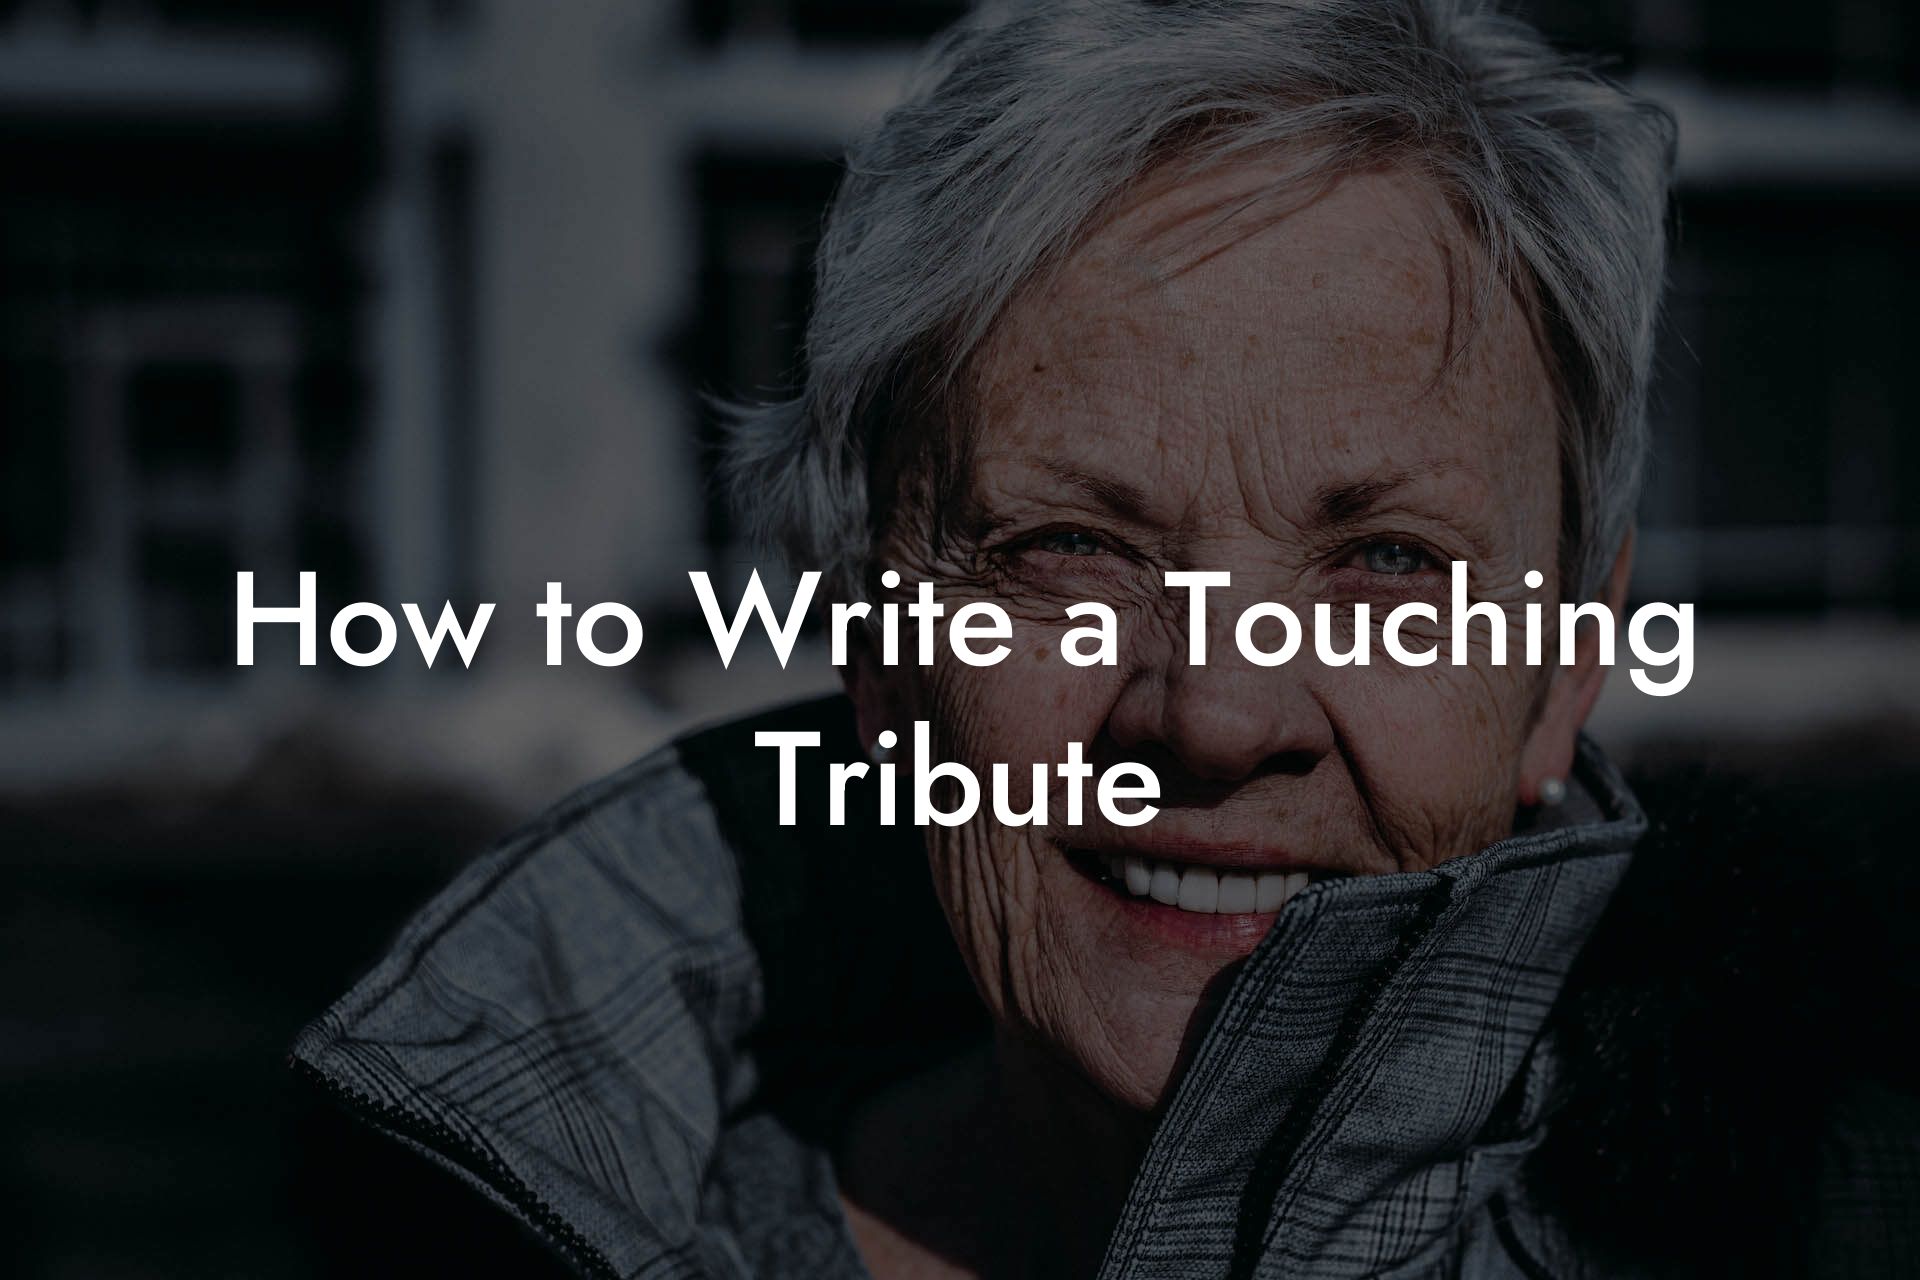 How to Write a Touching Tribute